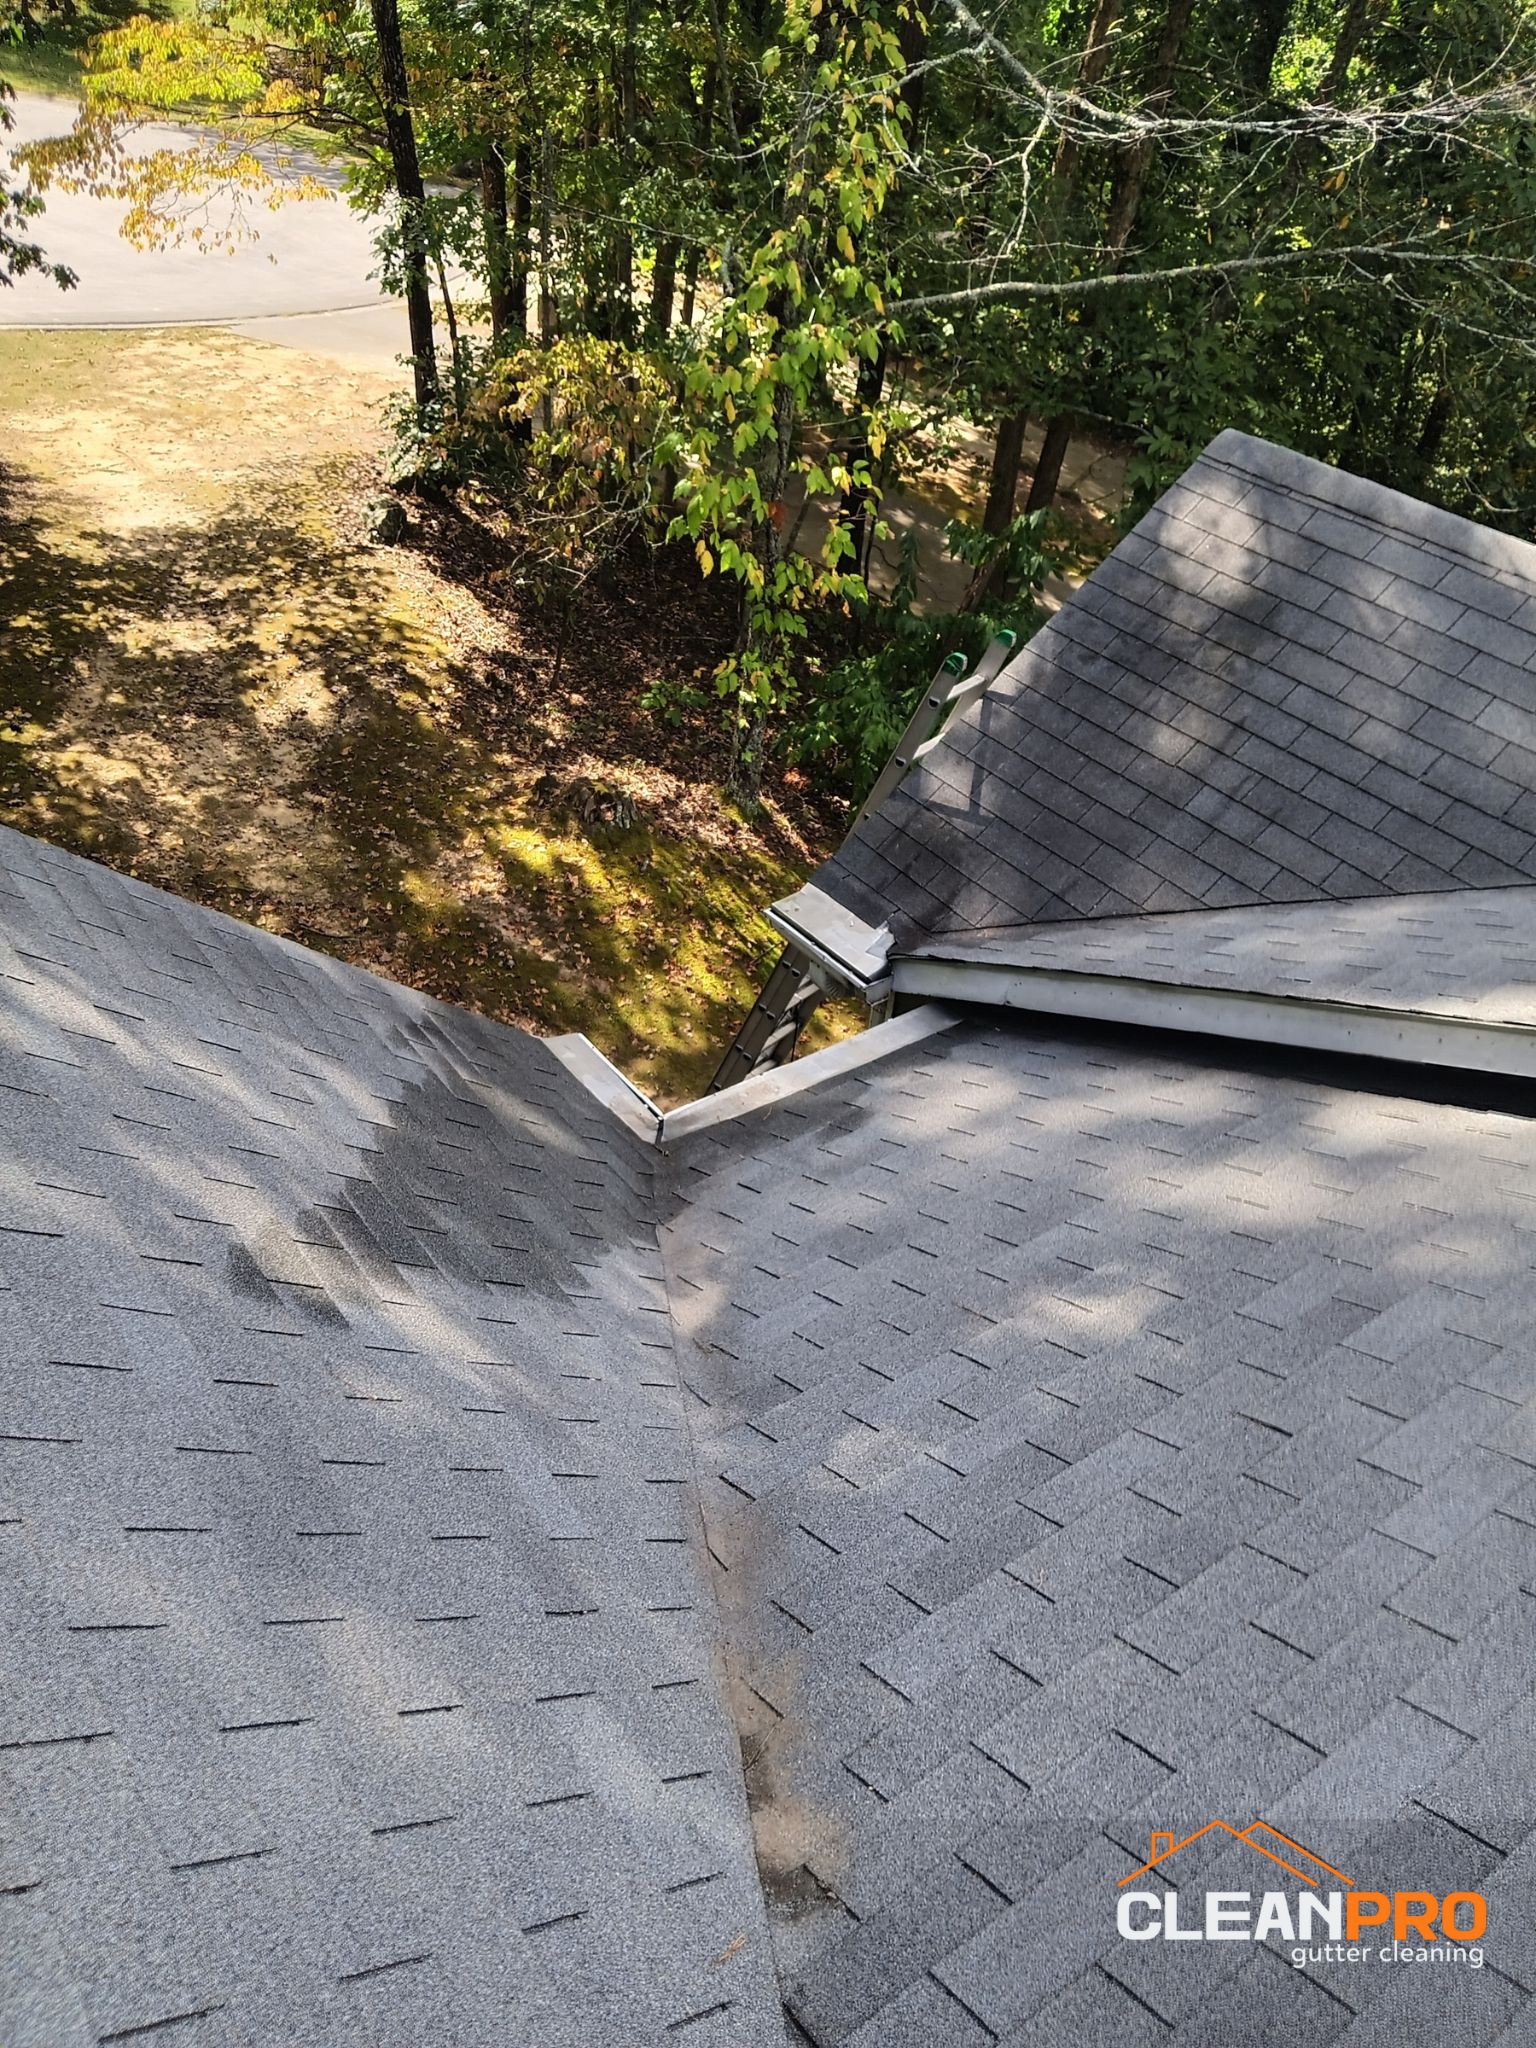 Best Gutter Cleaning Service in Pittsburgh